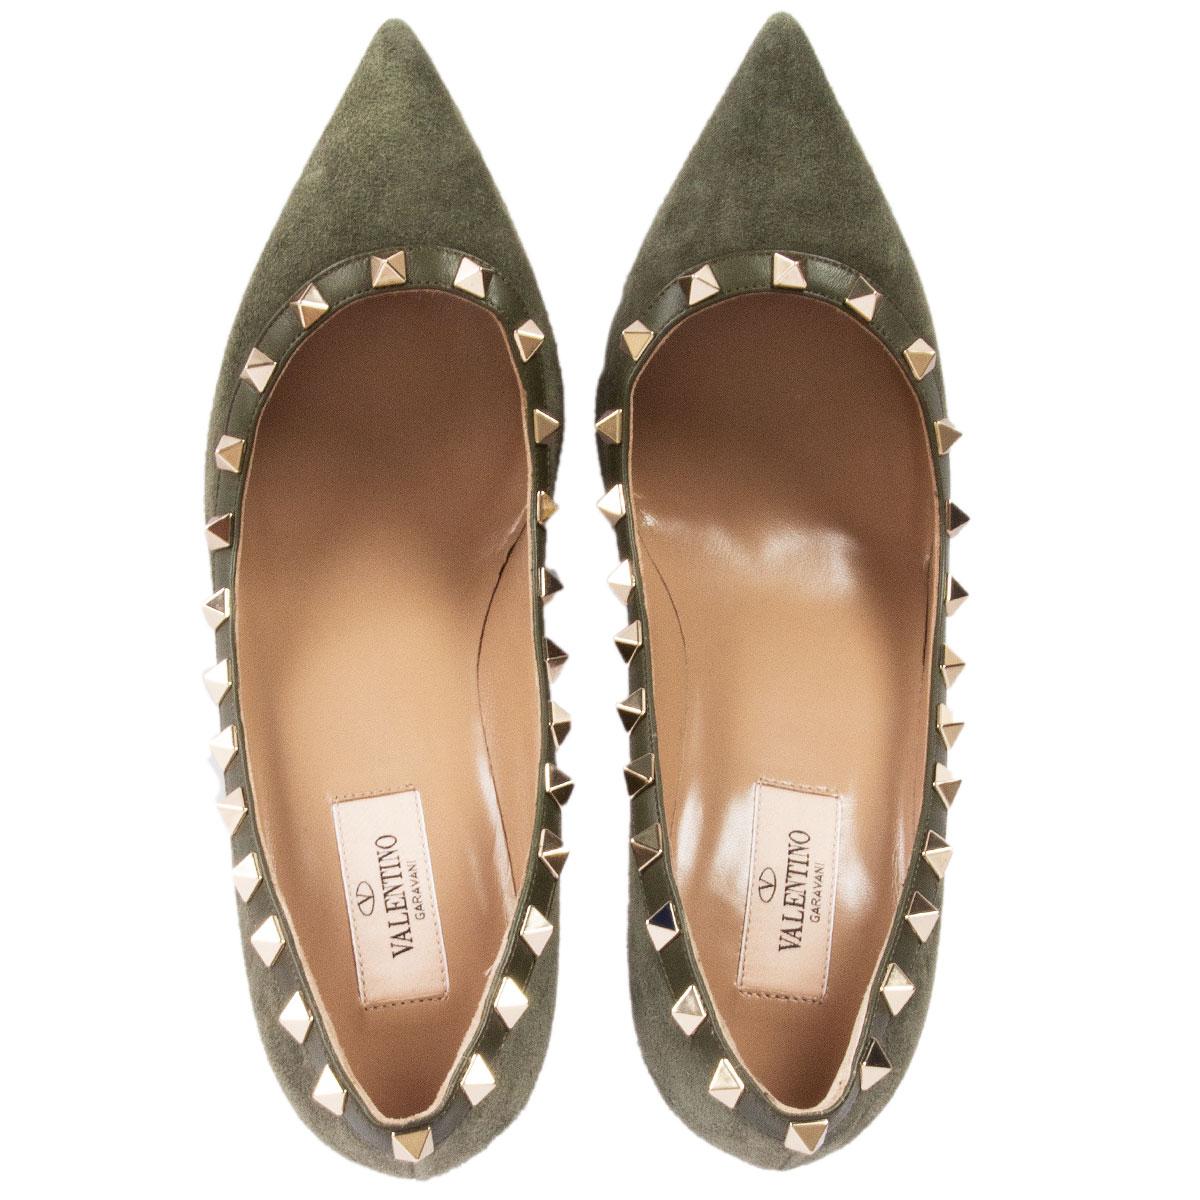 Women's VALENTINO green suede ROCKSTUD 85 POINTED-TOE Pumps Shoes 39